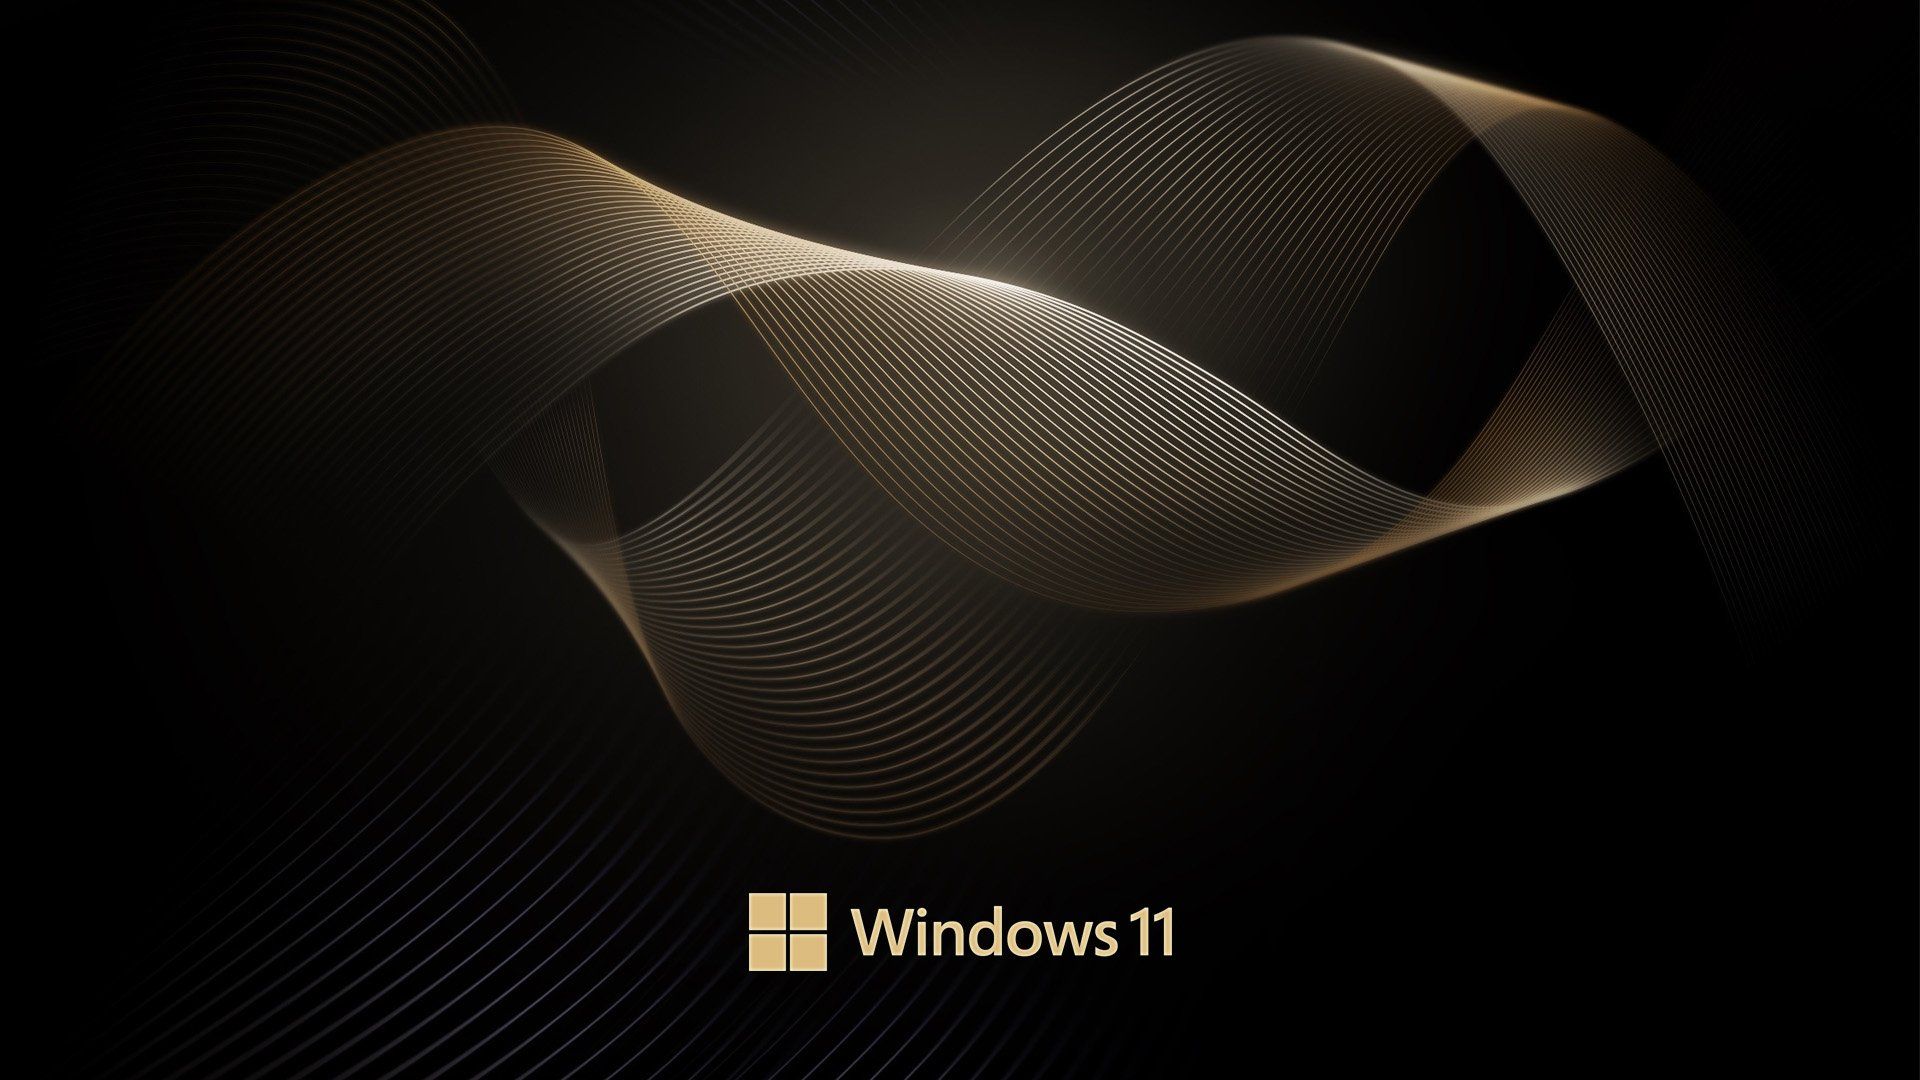 A black background with a gold wave and the Windows 11 logo - Windows 11